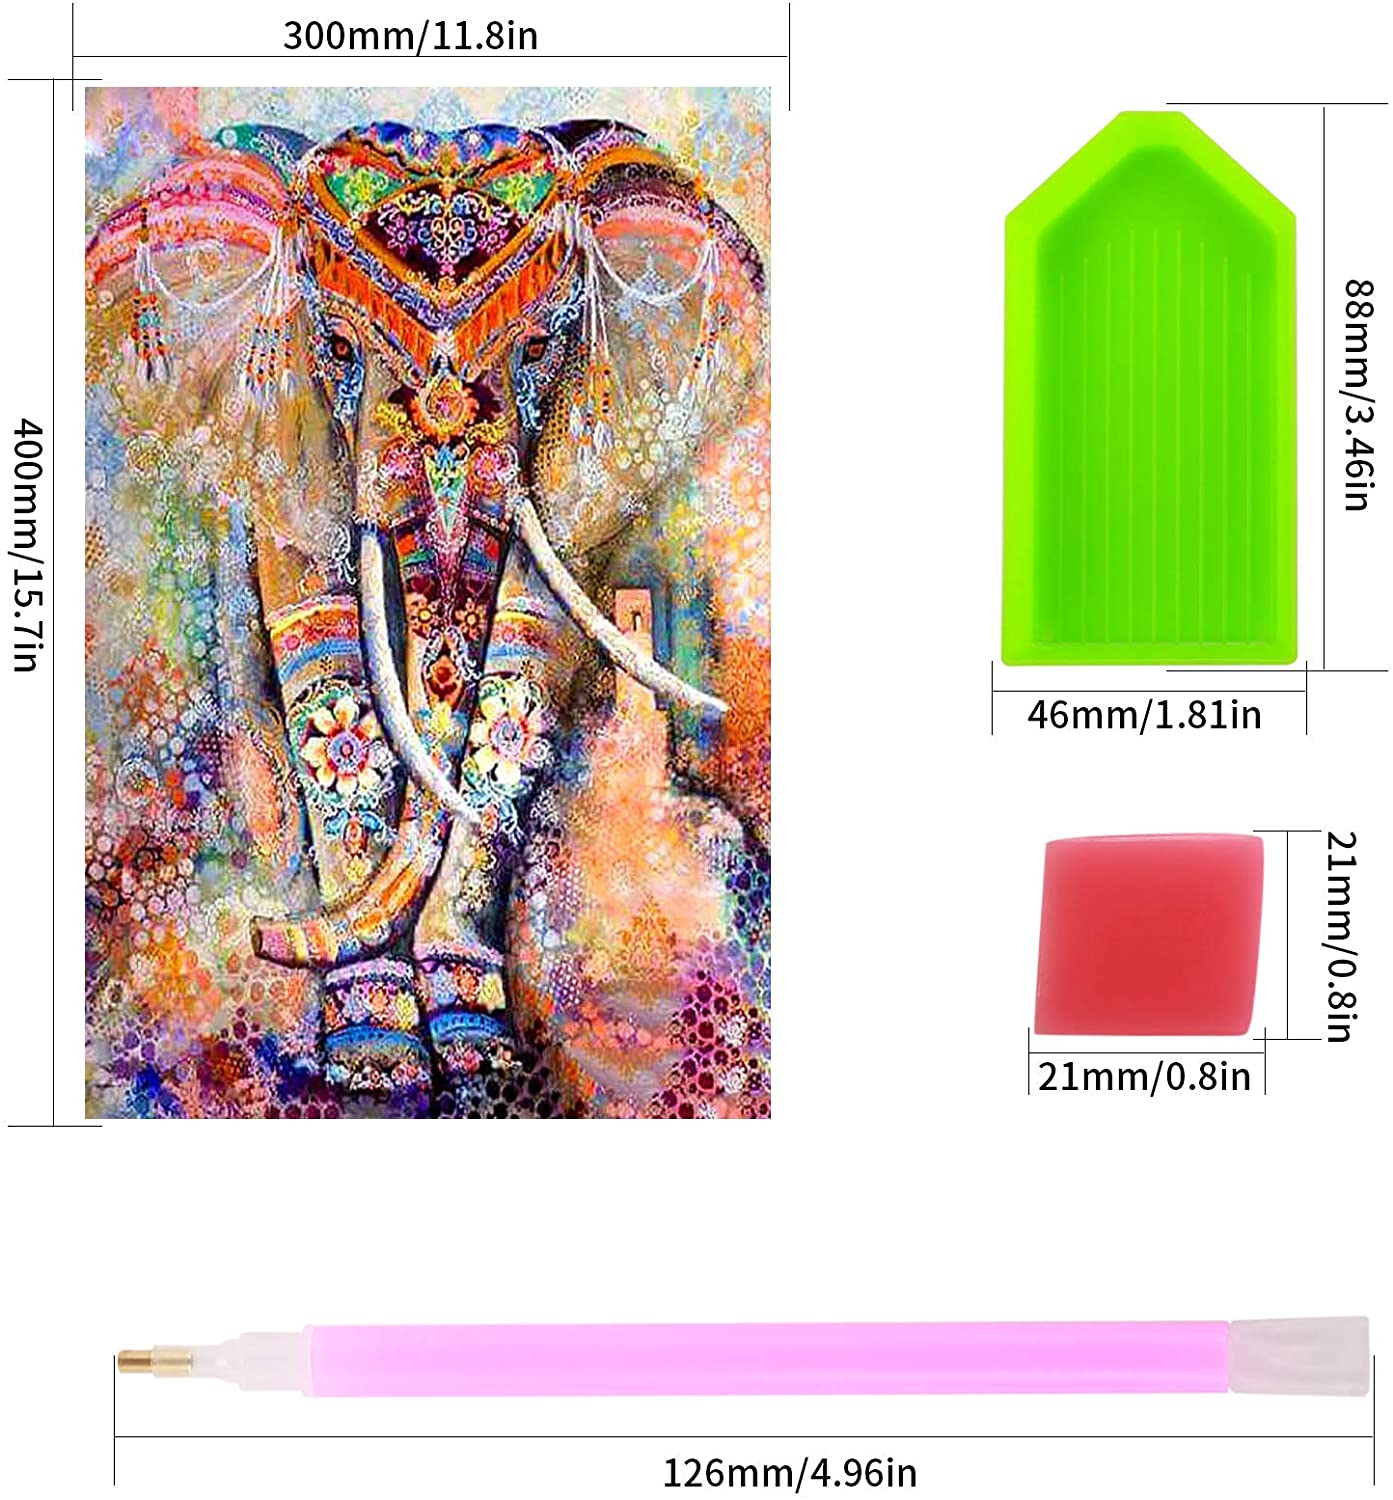 5D Diamond Paint Kit, Elephant DIY Crystal Embroidery Painting, Full Drill Diamond Cross Stitch Painting, Colorful Paintings Pictures Art Craft for Home, Wall Decoration Brand: yyazyhc